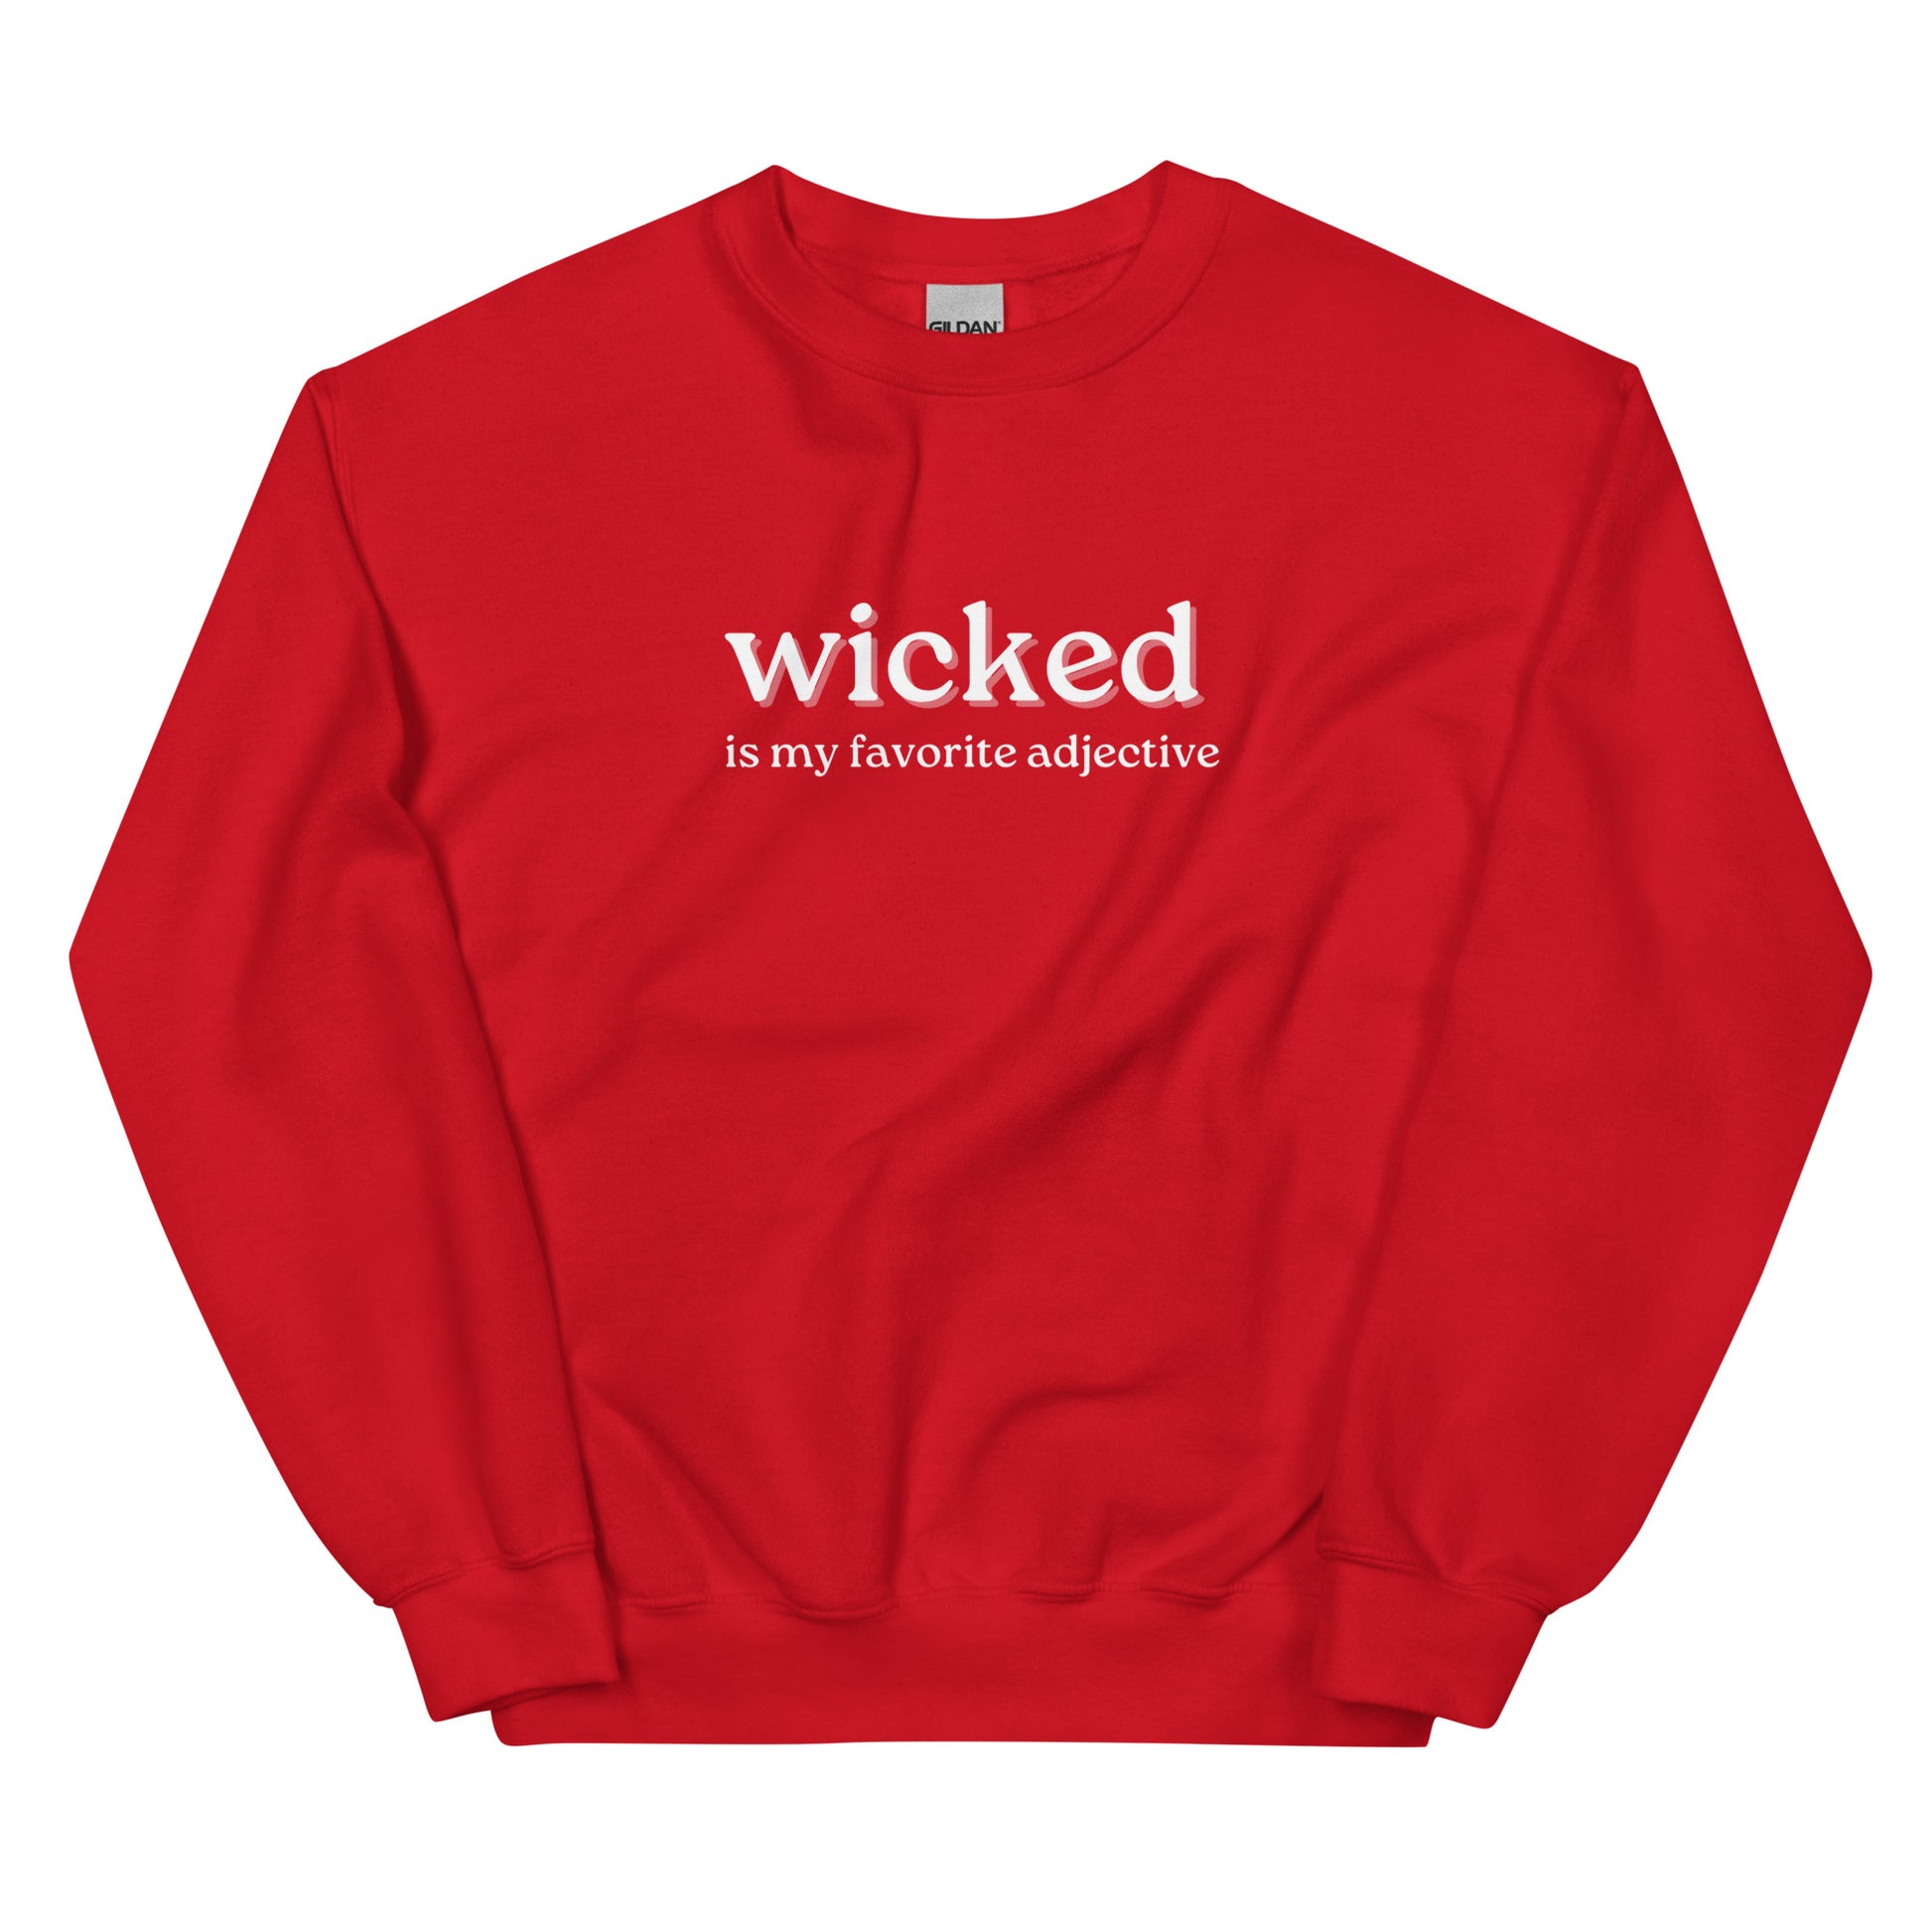 red crewneck that says "wicked is my favorite adjective" in white lettering